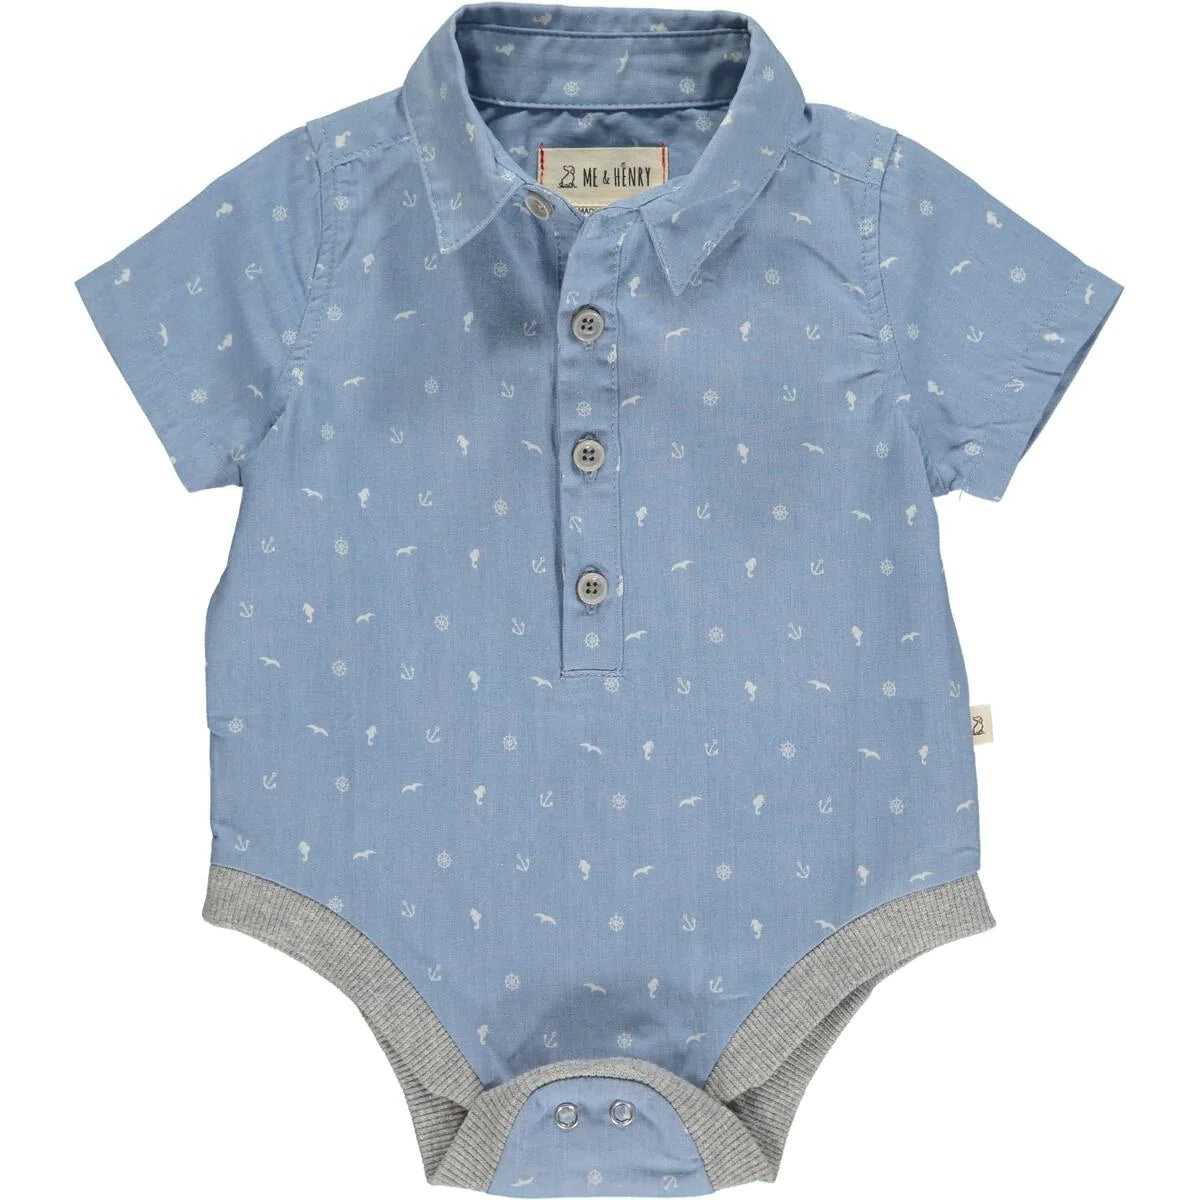 Helford Short Sleeve Collared Body Suit